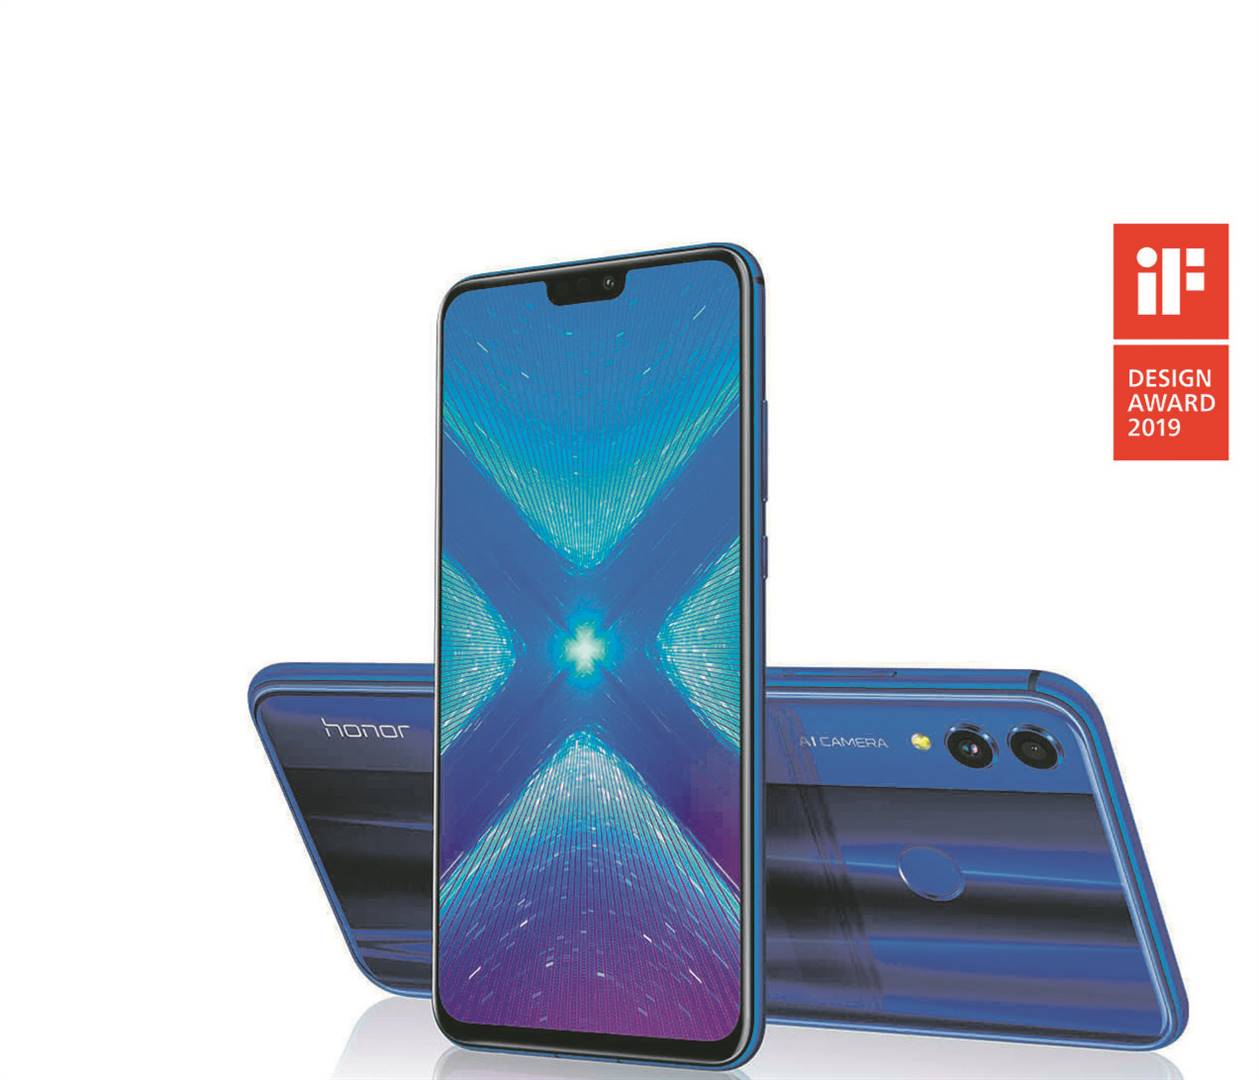 Honor making an impact in the smartphone market